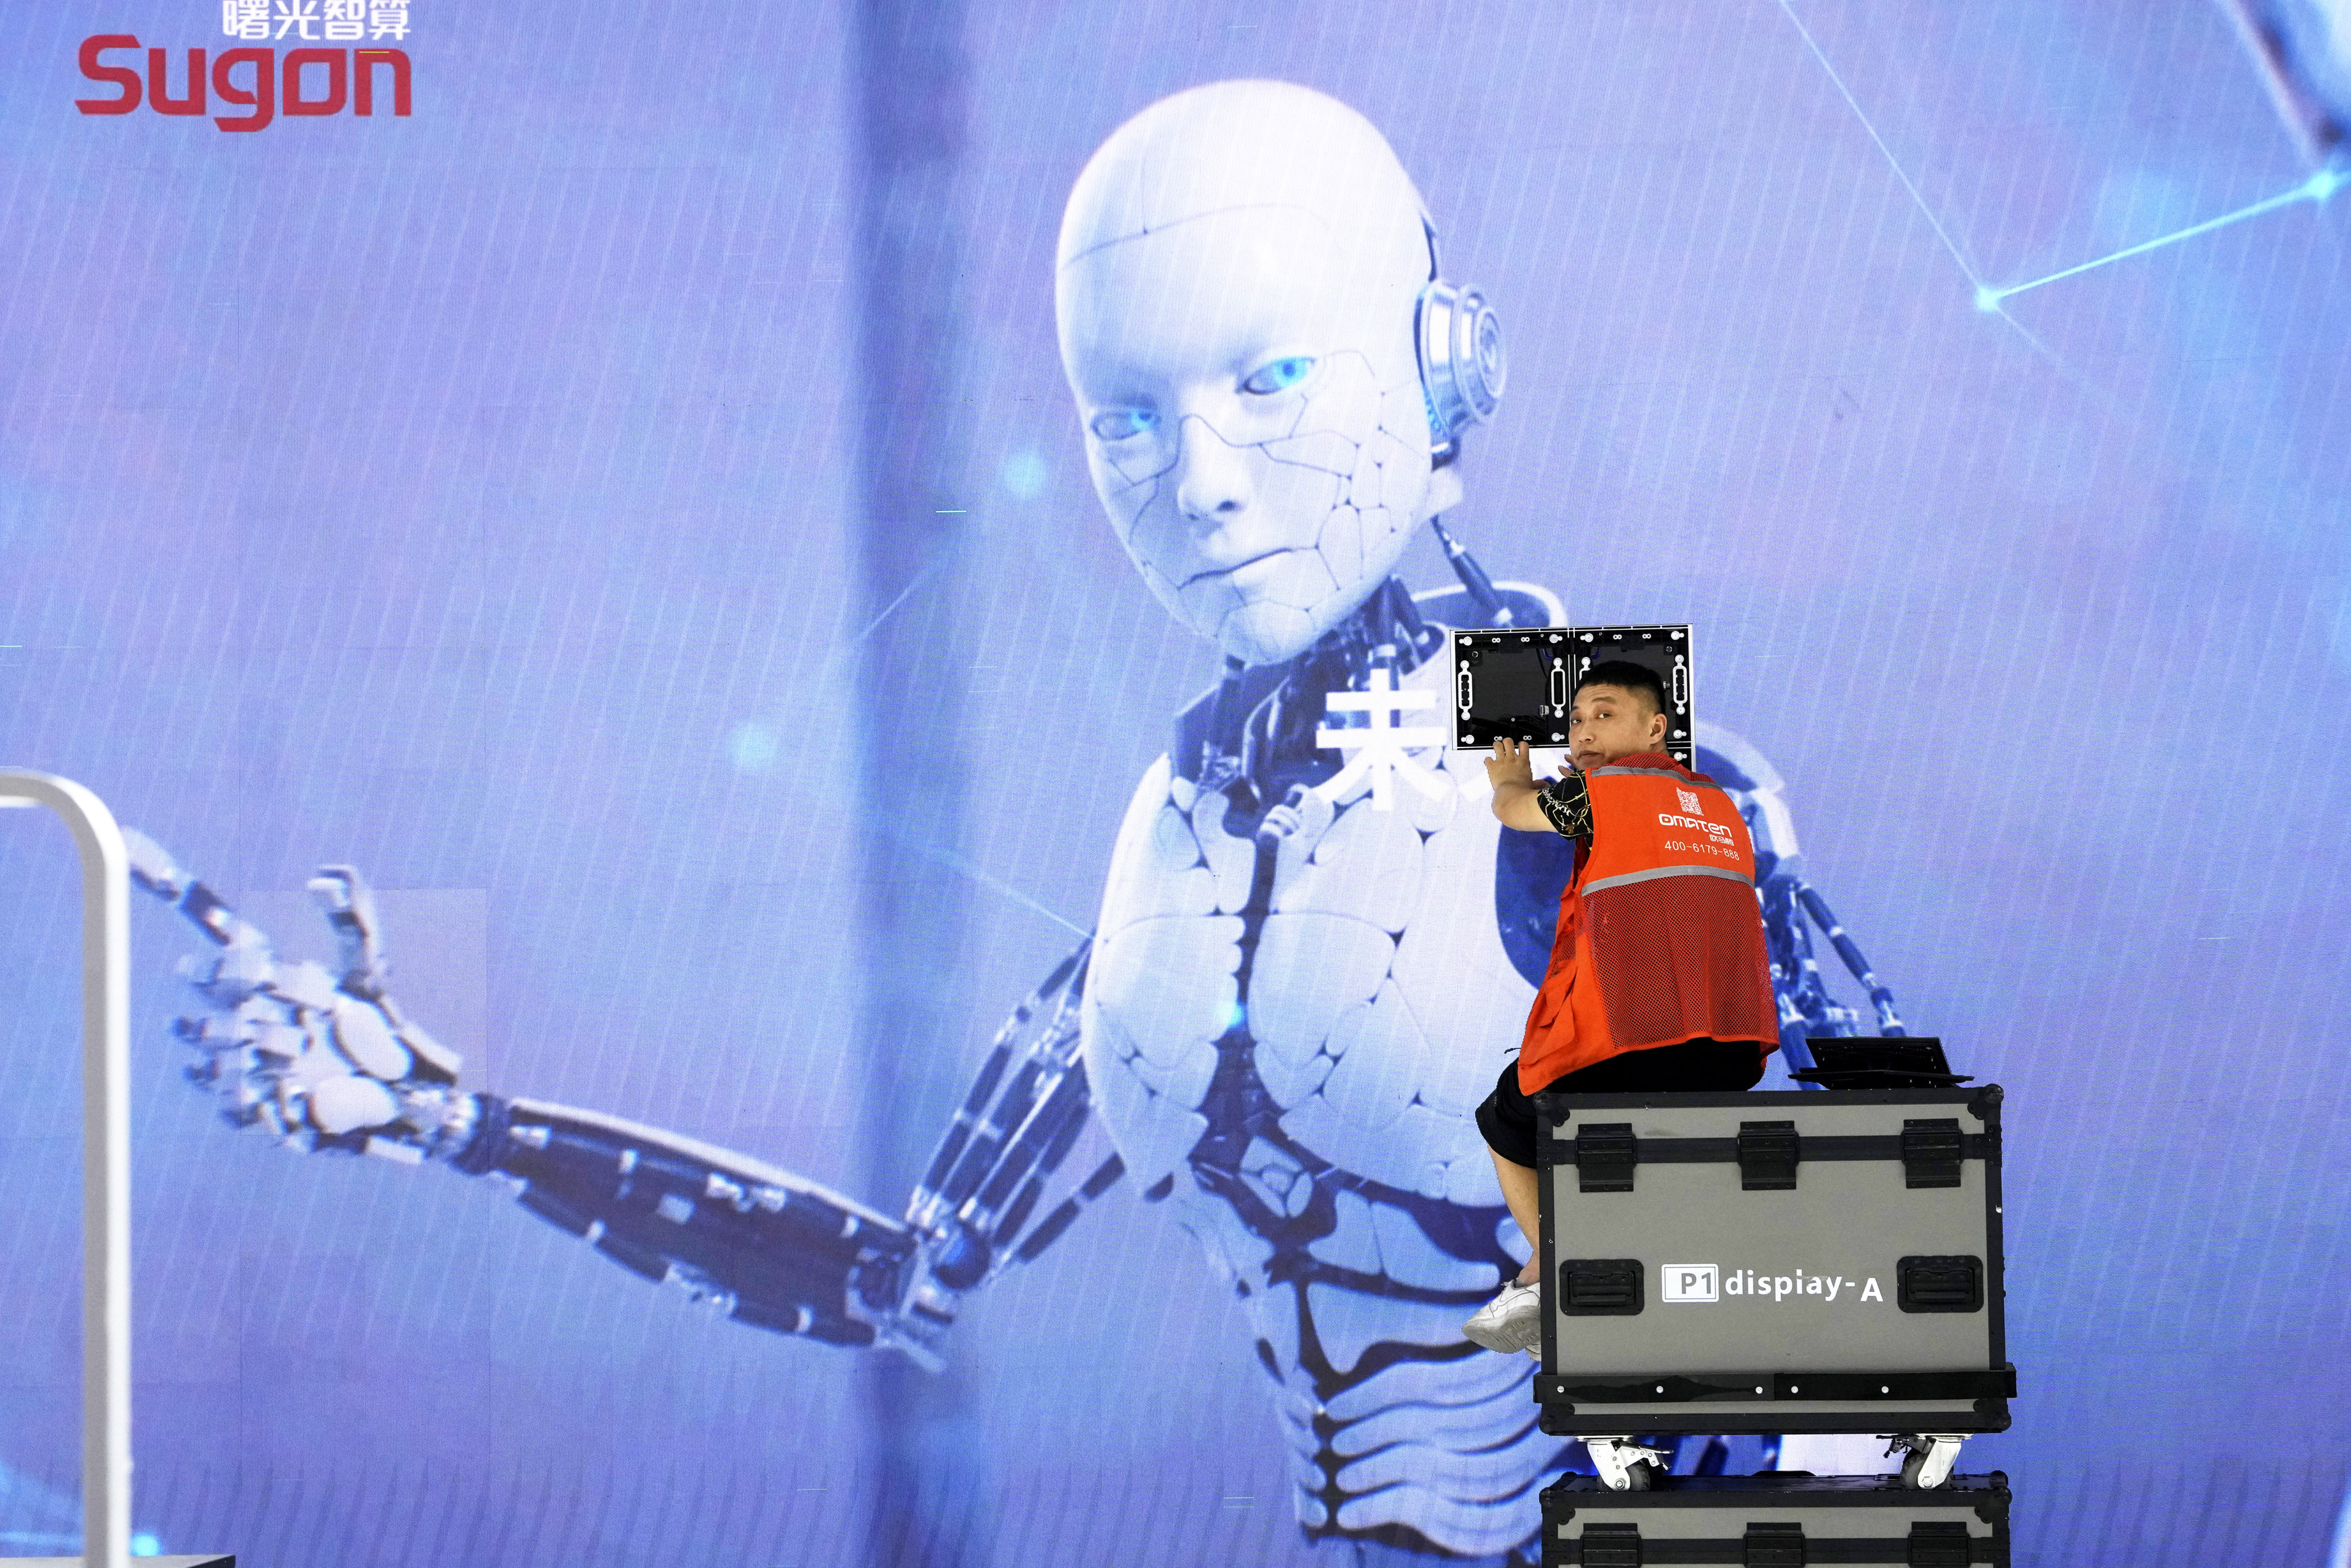 Beijing is hoping the nation’s state-owned enterprises can give China the upper hand in hi-tech robotics. Photo: AP